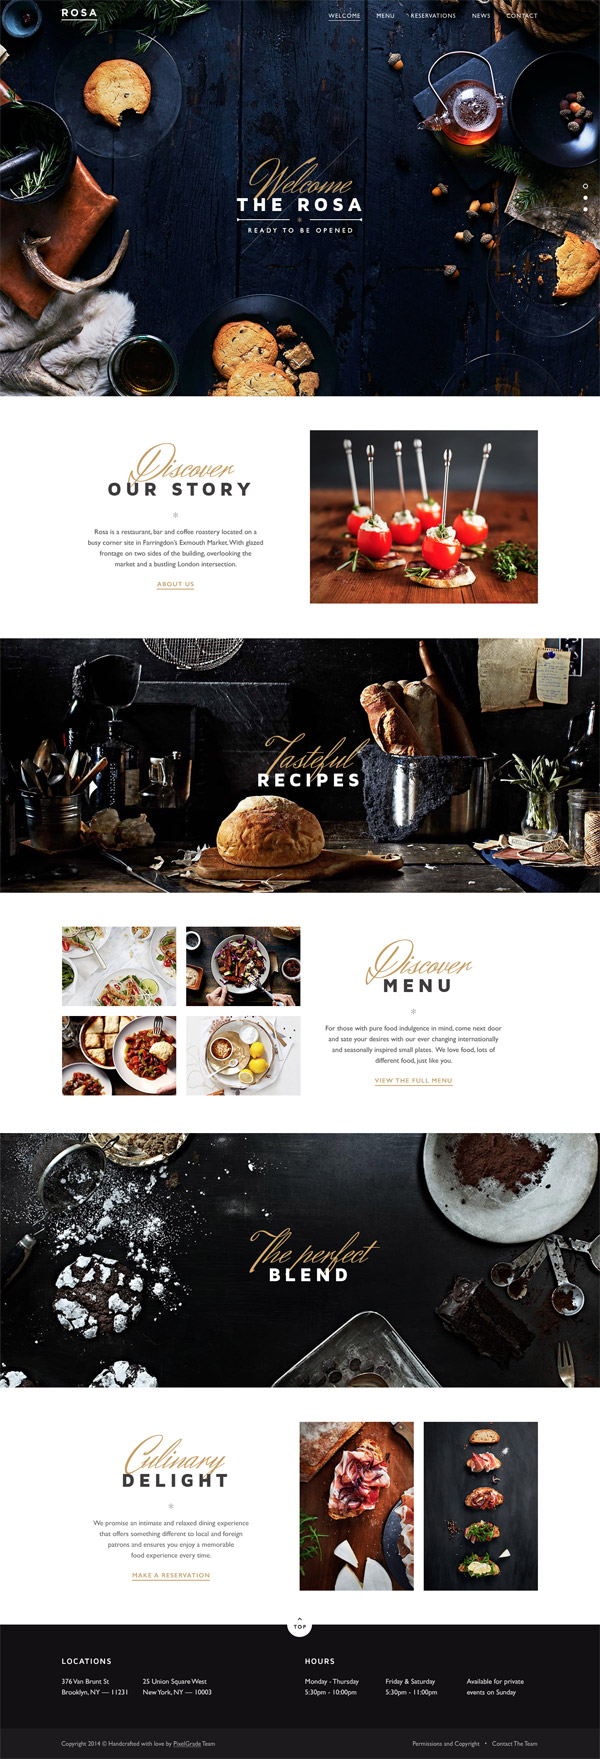 15-websites-with-full-page-designs-4